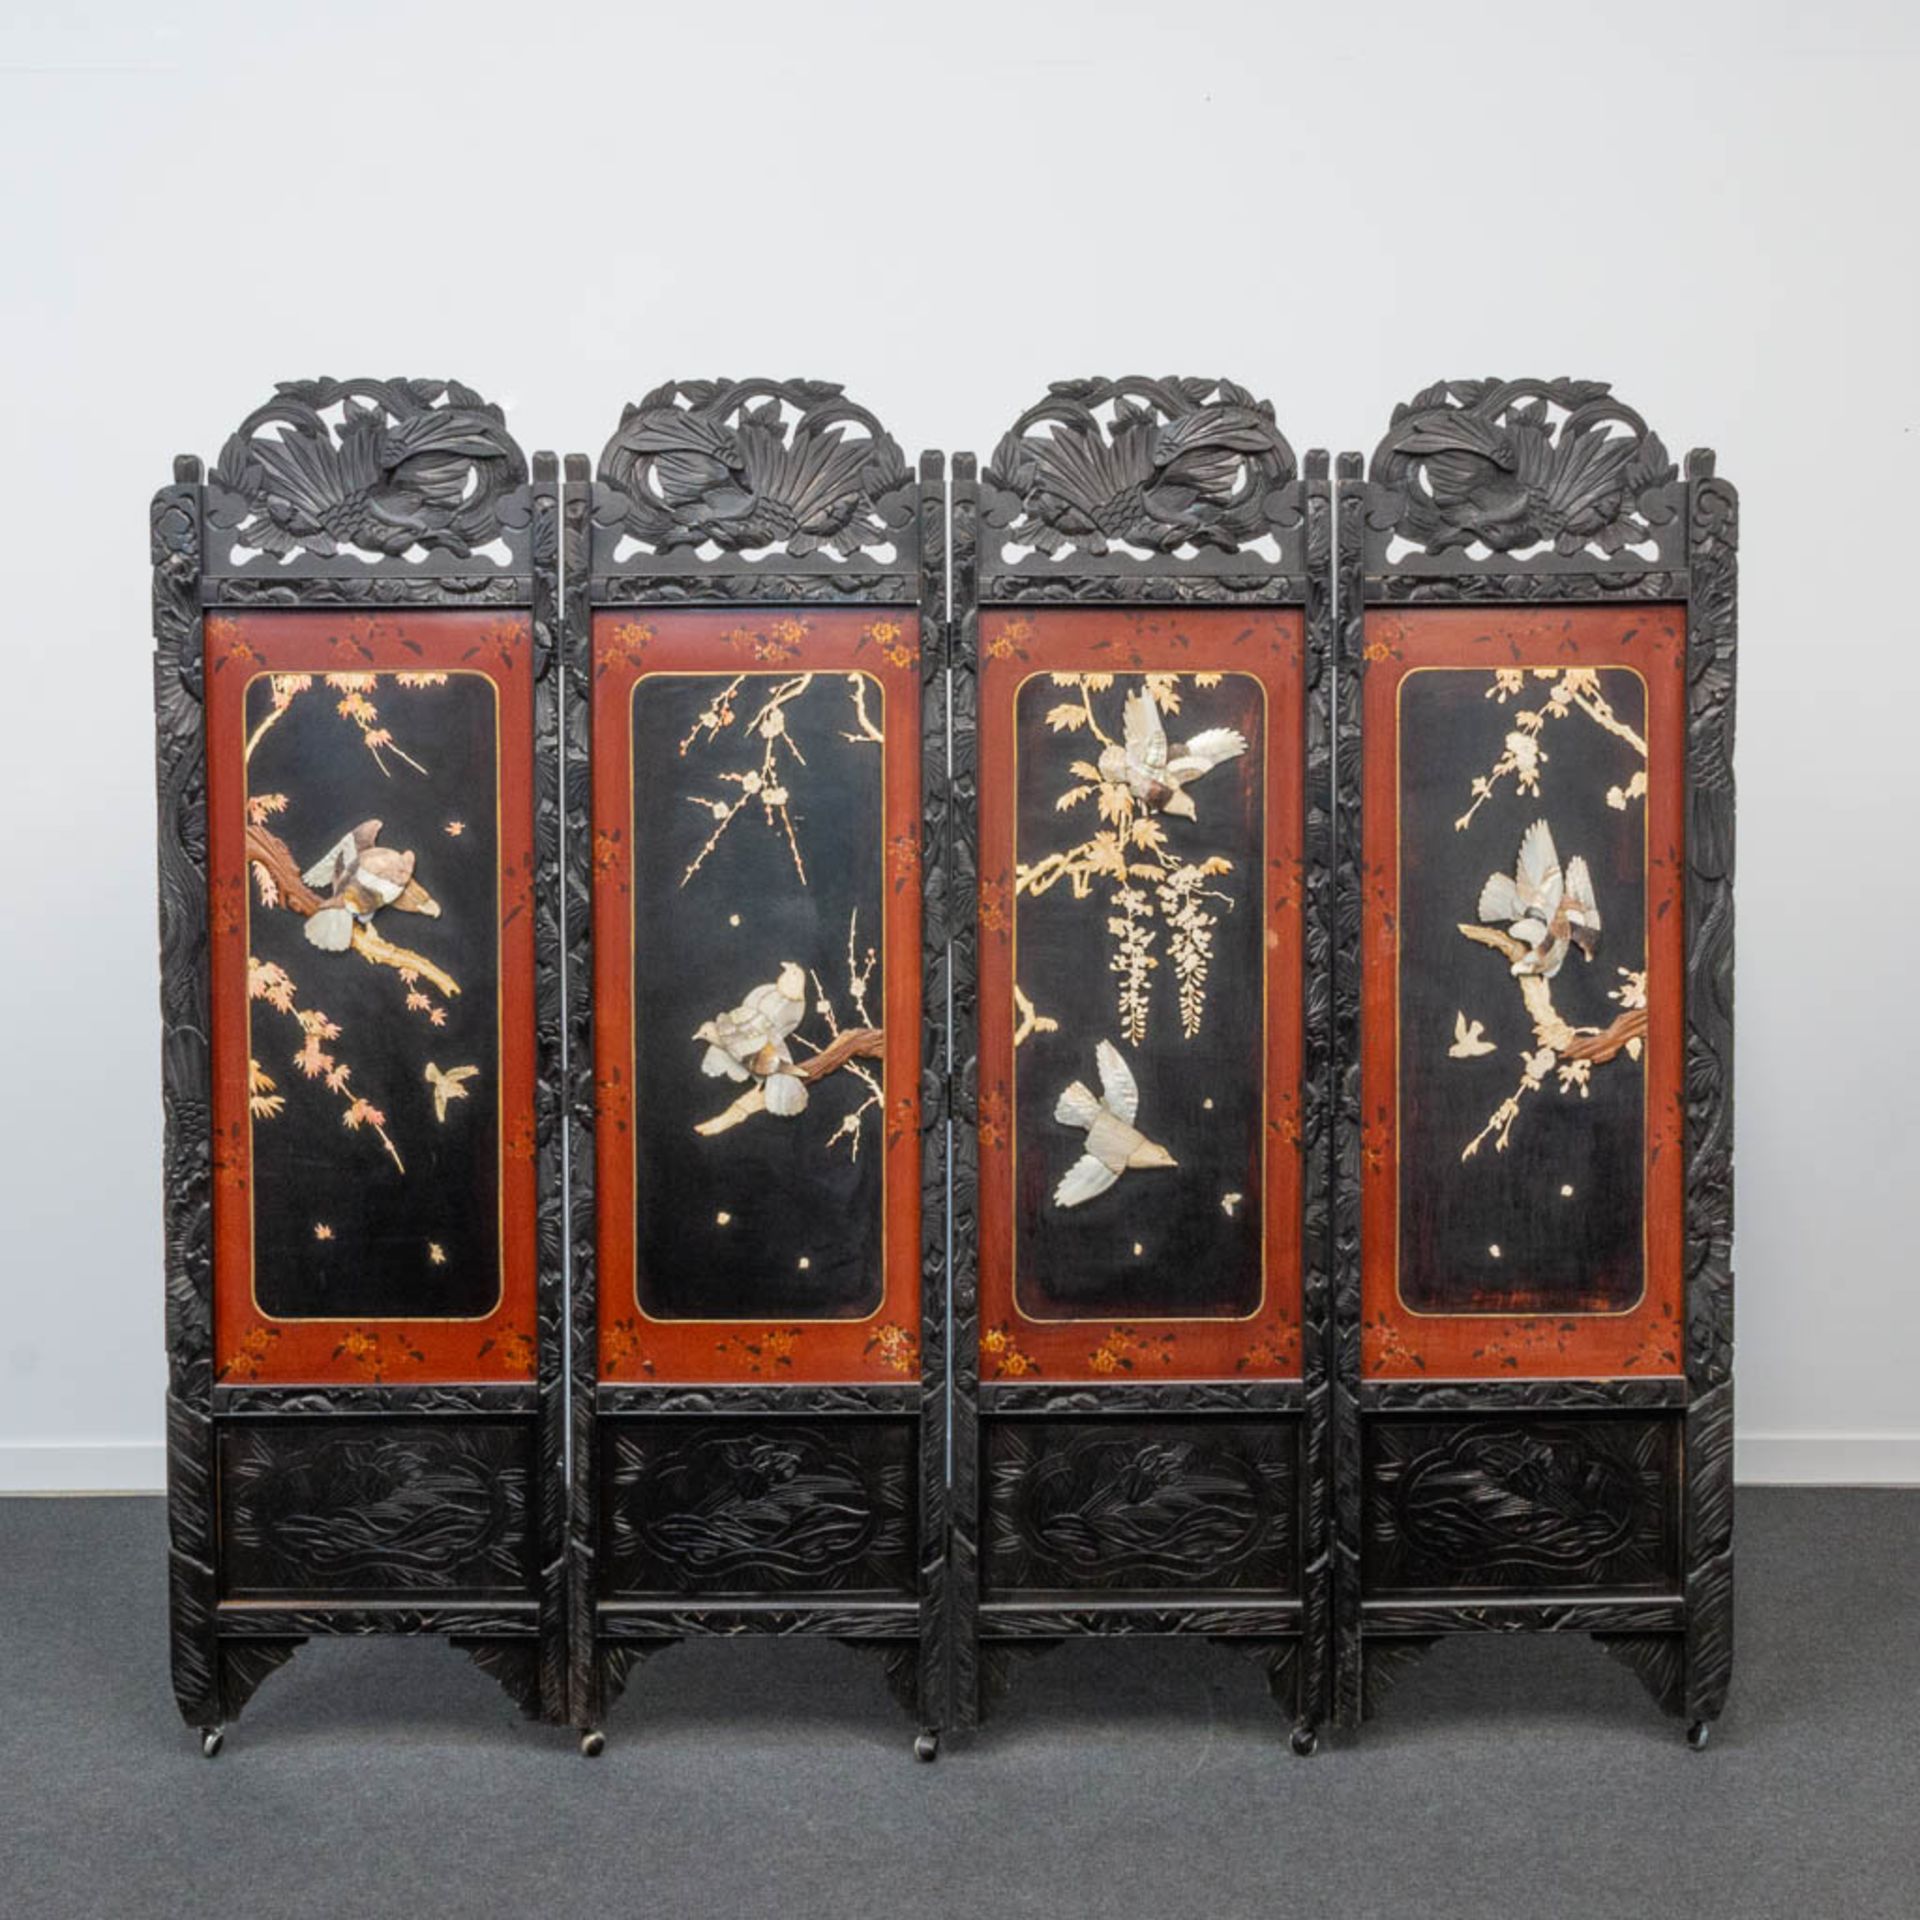 A Chinese hardwood folding screen / Room divider with stone birds decorations - Image 3 of 19